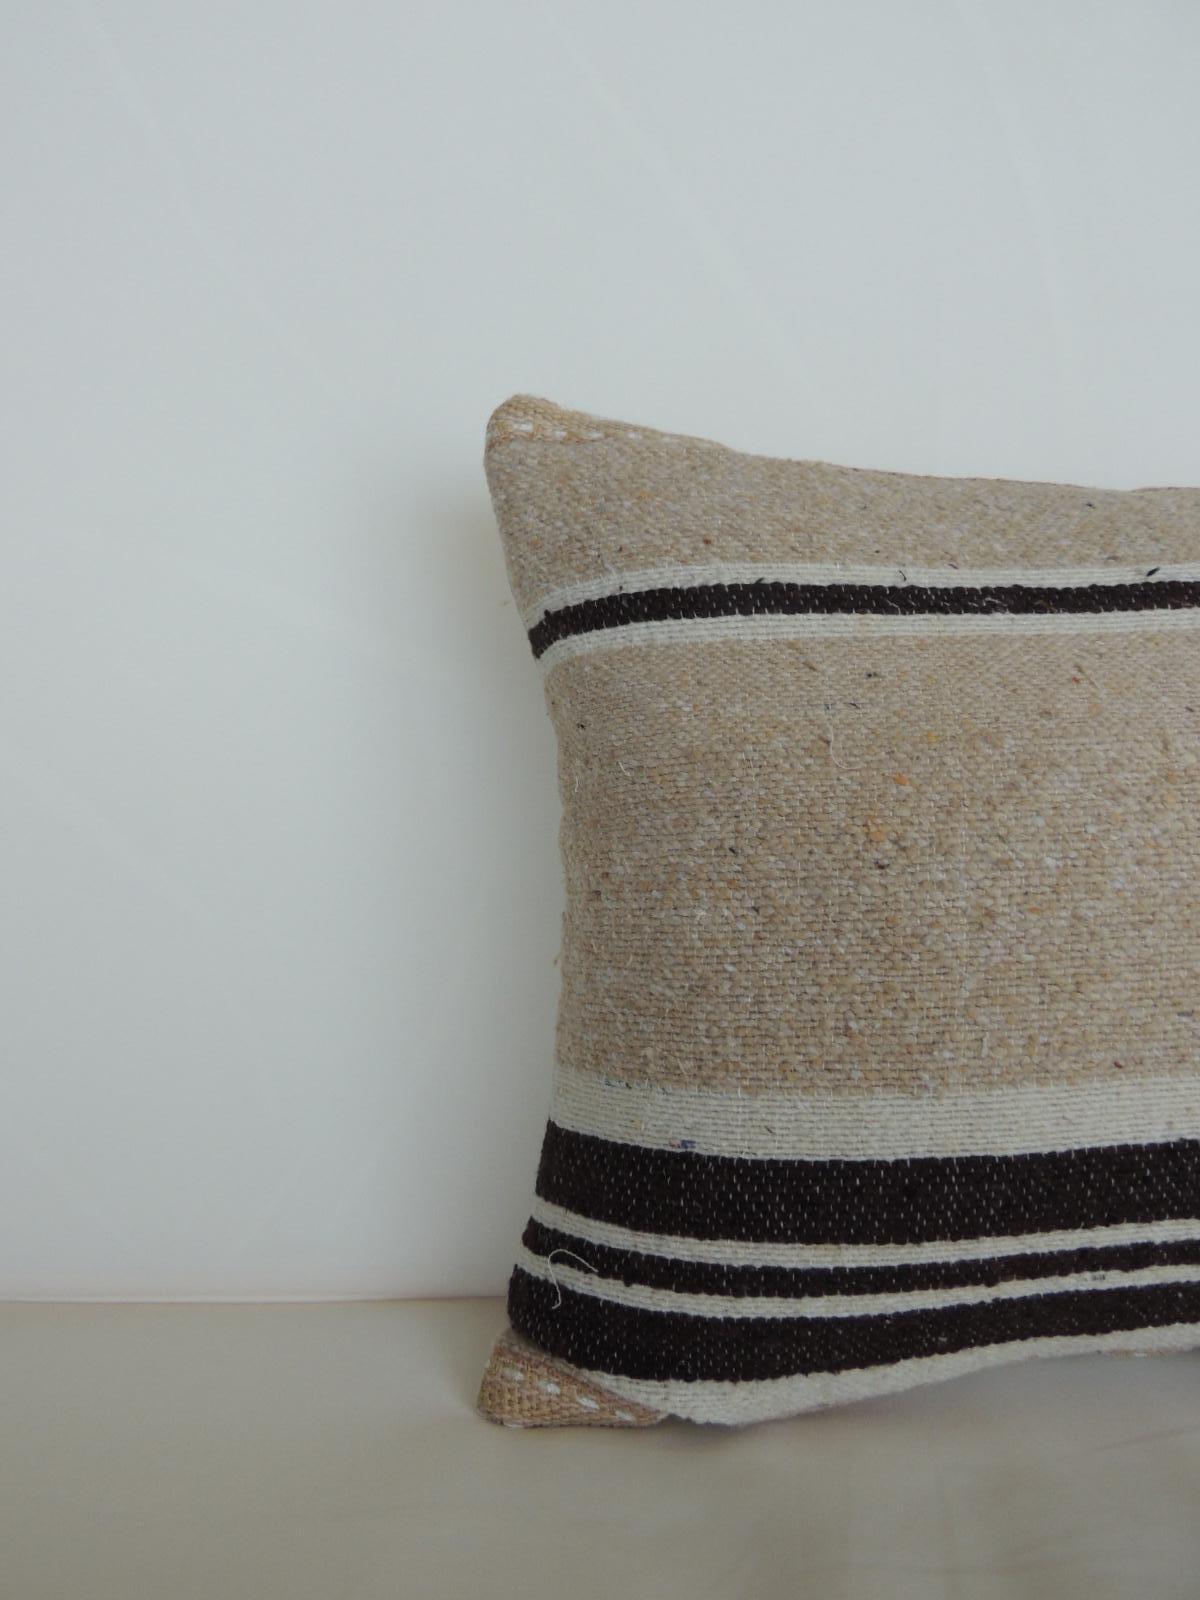 Vintage African woven tribal artisanal textile decorative pillow with jute trim.
Tunisian vintage artisanal tribal textile decorative pillows handcrafted from the vintage wool and hemp hand-loomed by the Berber tribes from the Atlas Mountains of